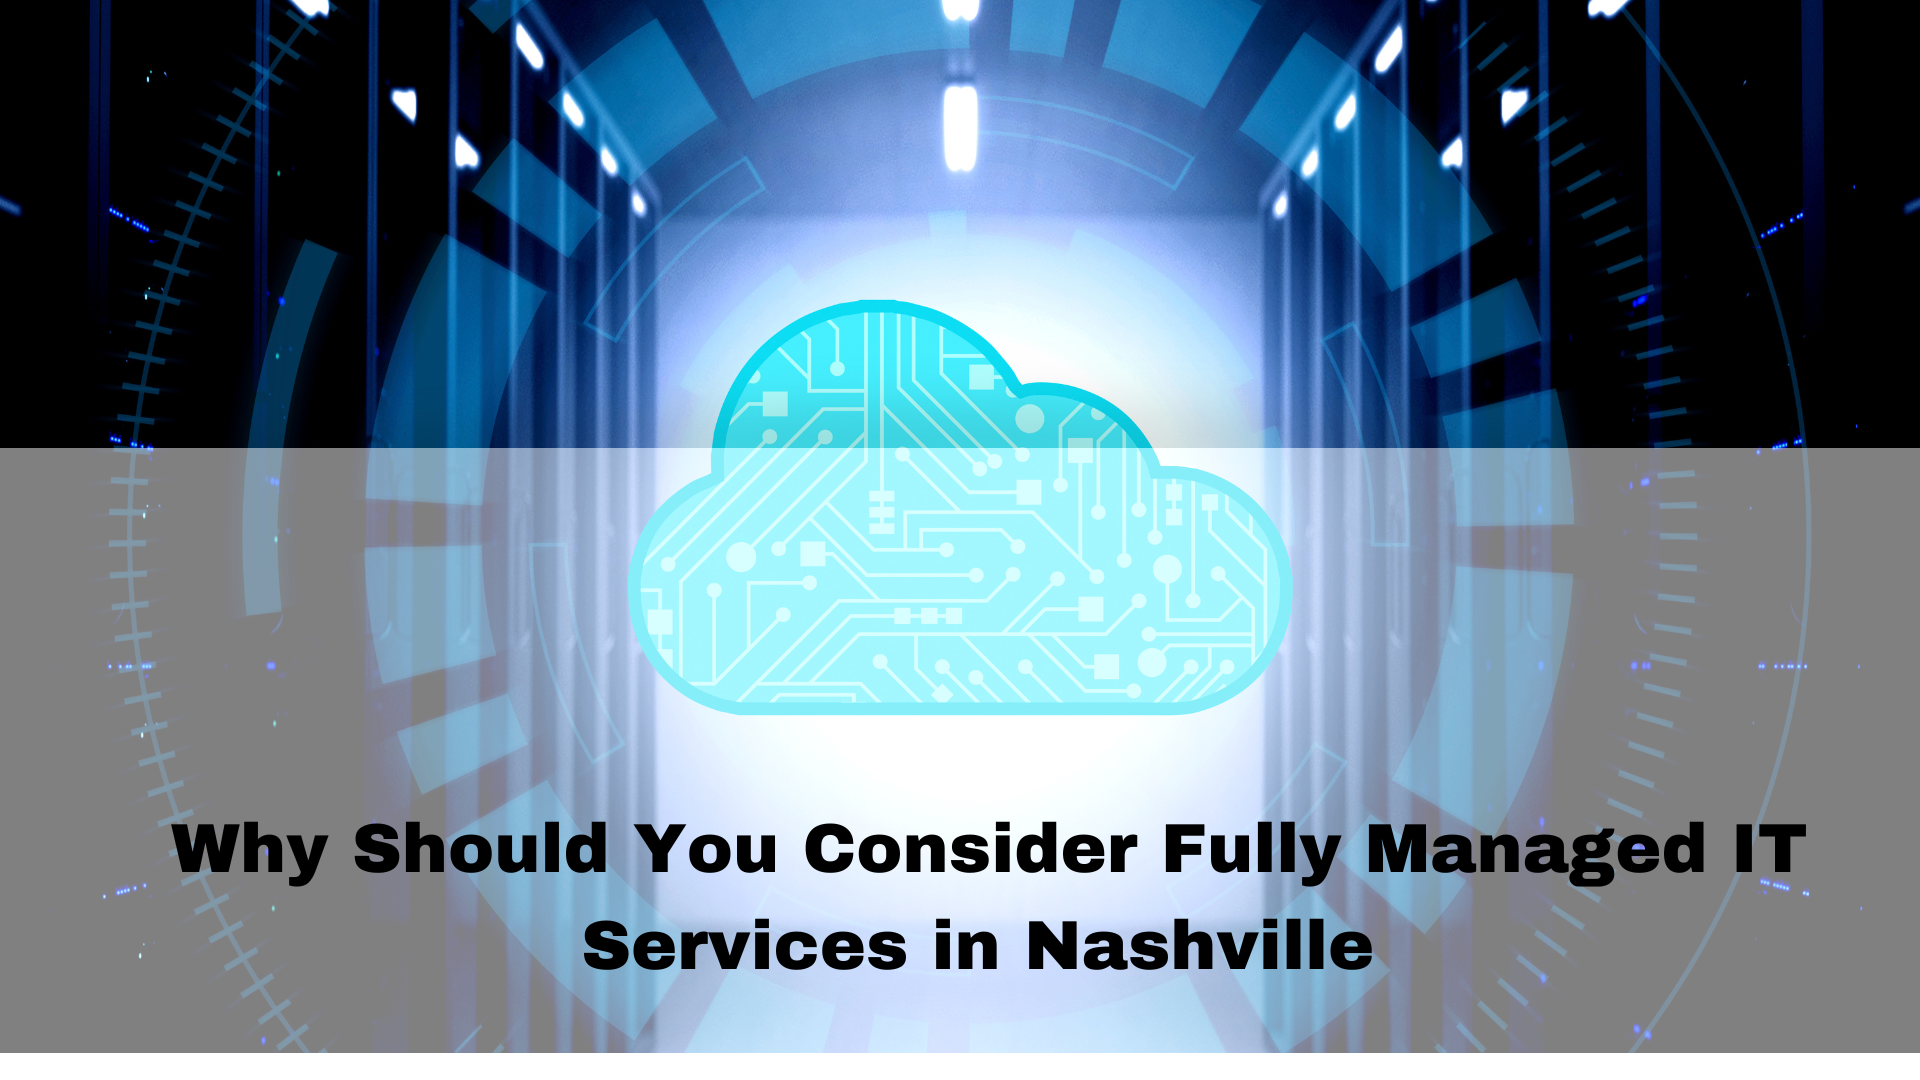 Why Should You Consider Fully Managed IT Services in Nashville